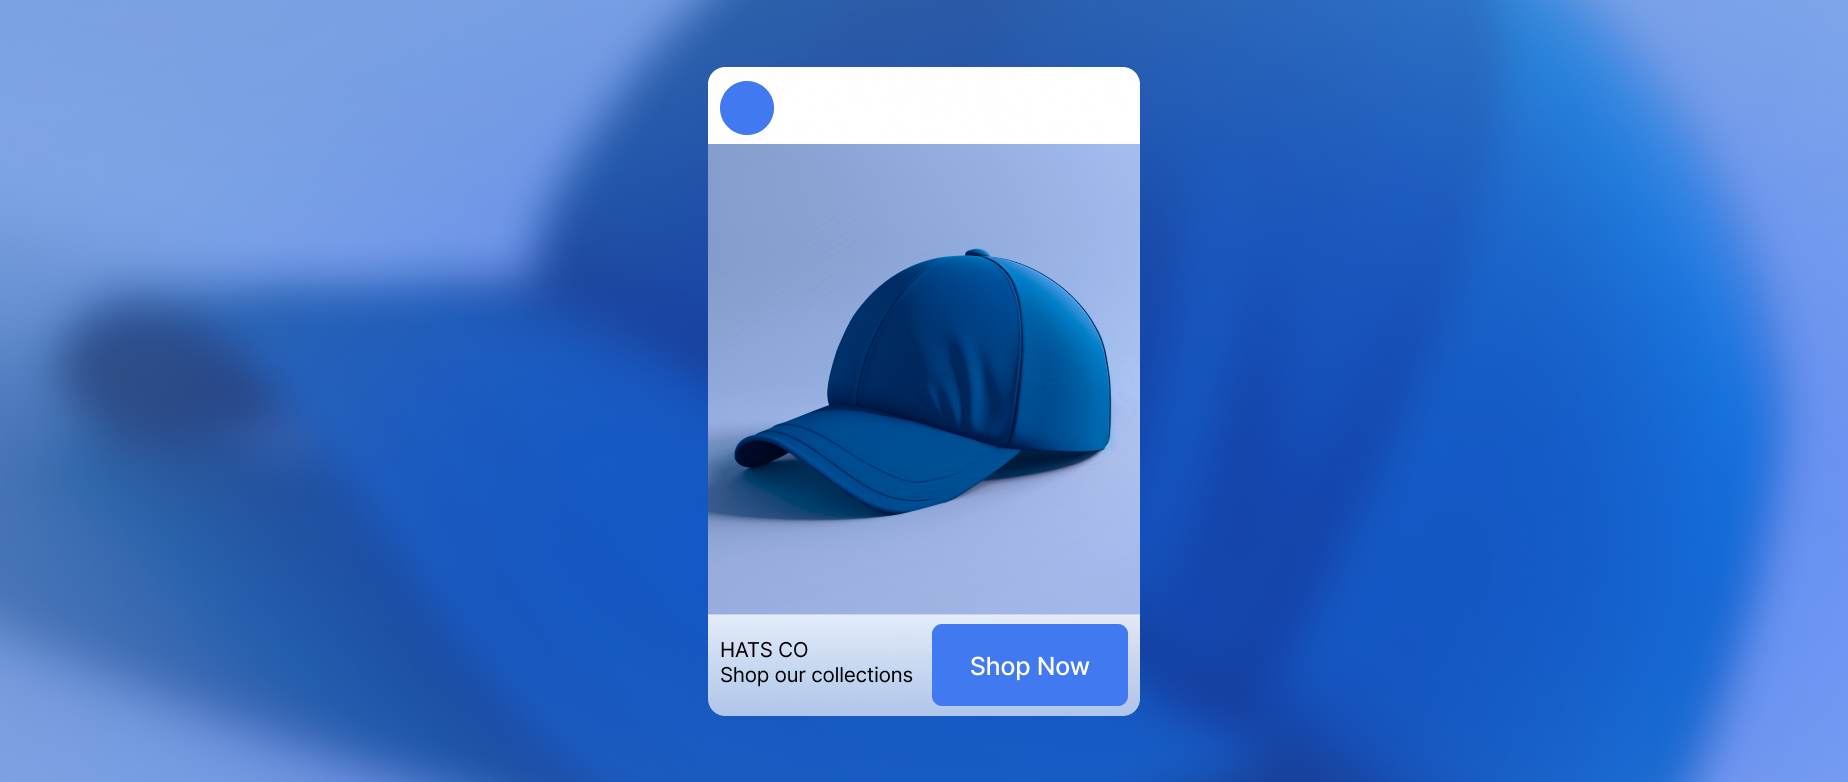 An abstract version of a Facebook ad showing a blue hat for sale.